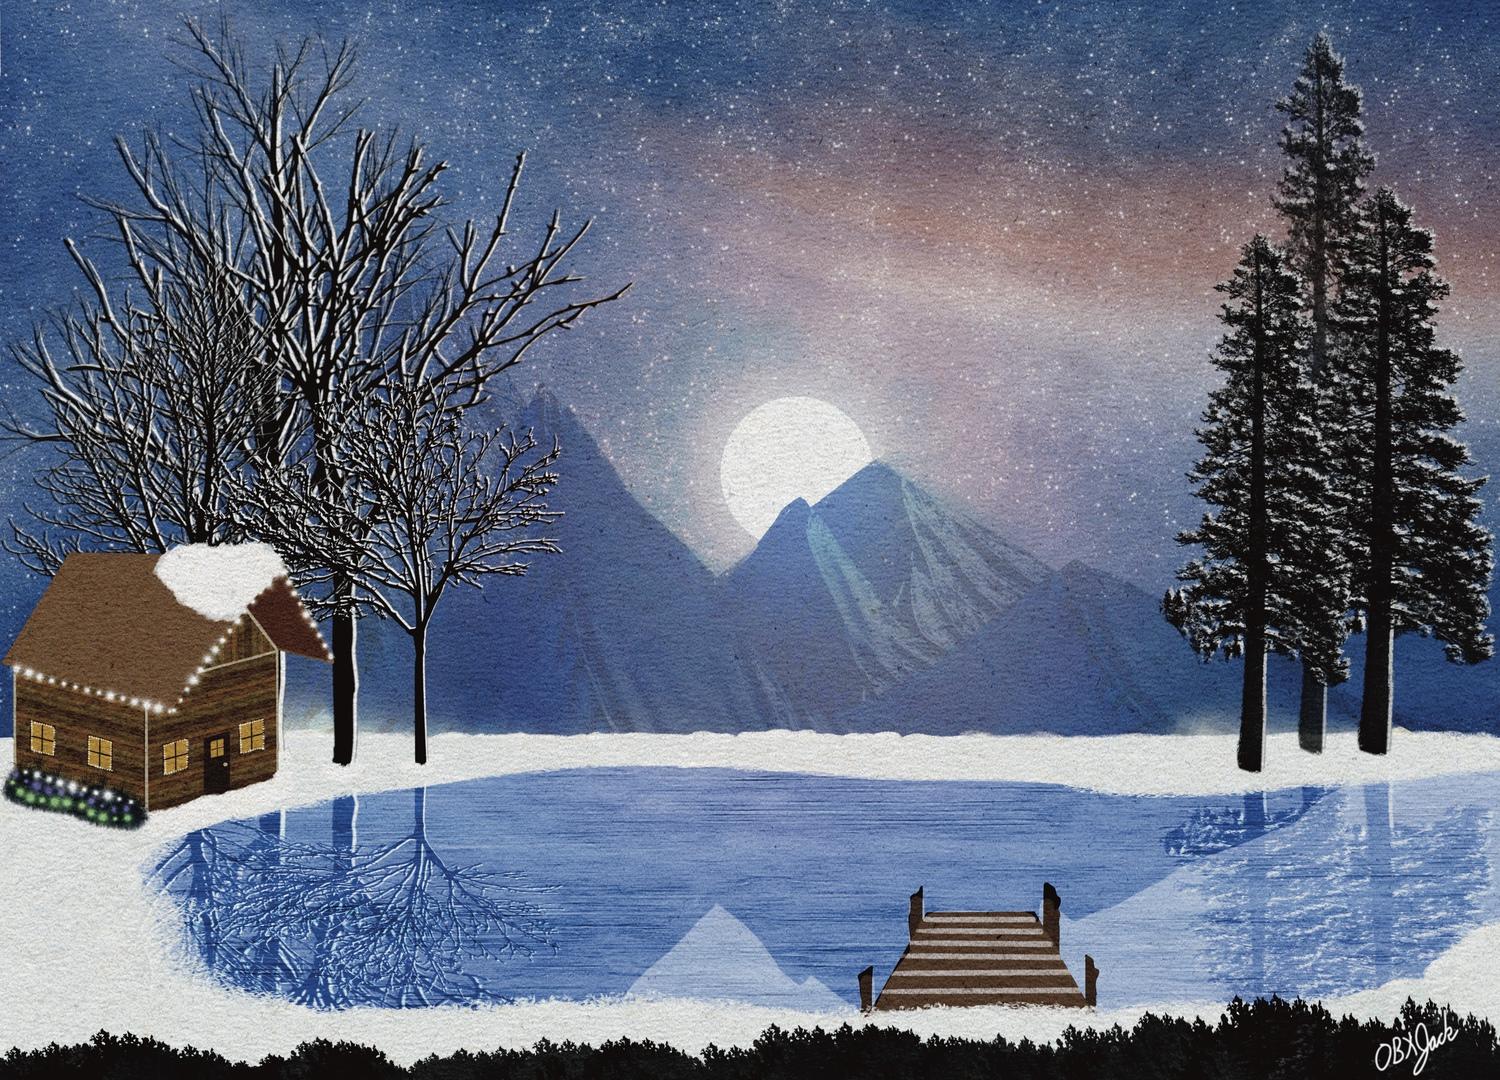 A wintry scene showing a rustic cabin beside a frozen lake with mountains in the distance. Christmas lights adorn the rustic cabin.